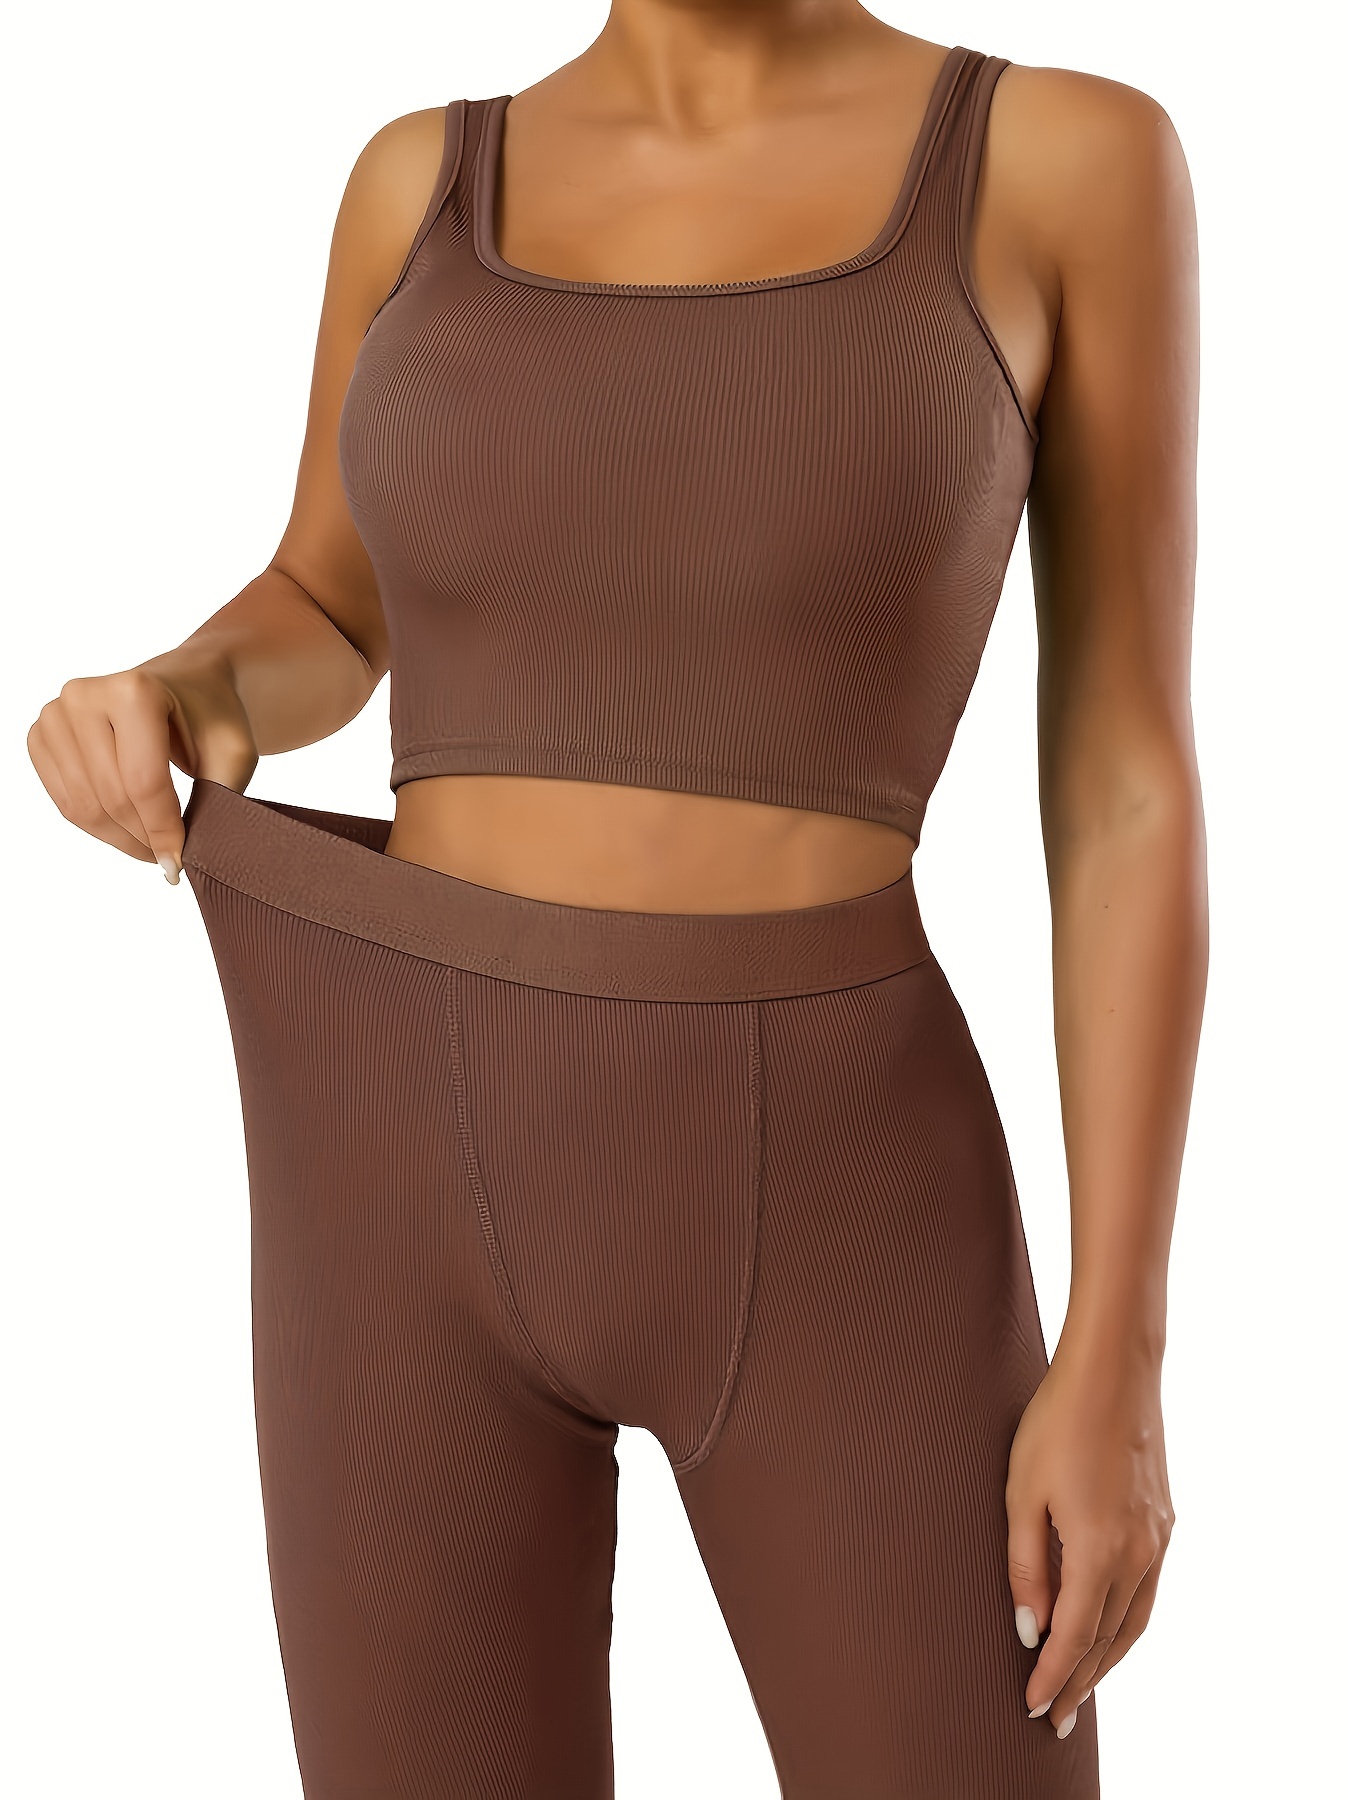  ZYZSTR Women Underwear Sports Yoga Lace Top Bra Cut Out Mesh  Gym Sport Workout High Elasticity Shockproof Tank Tops (Color : Iron Brown,  Size : Small) : Clothing, Shoes & Jewelry